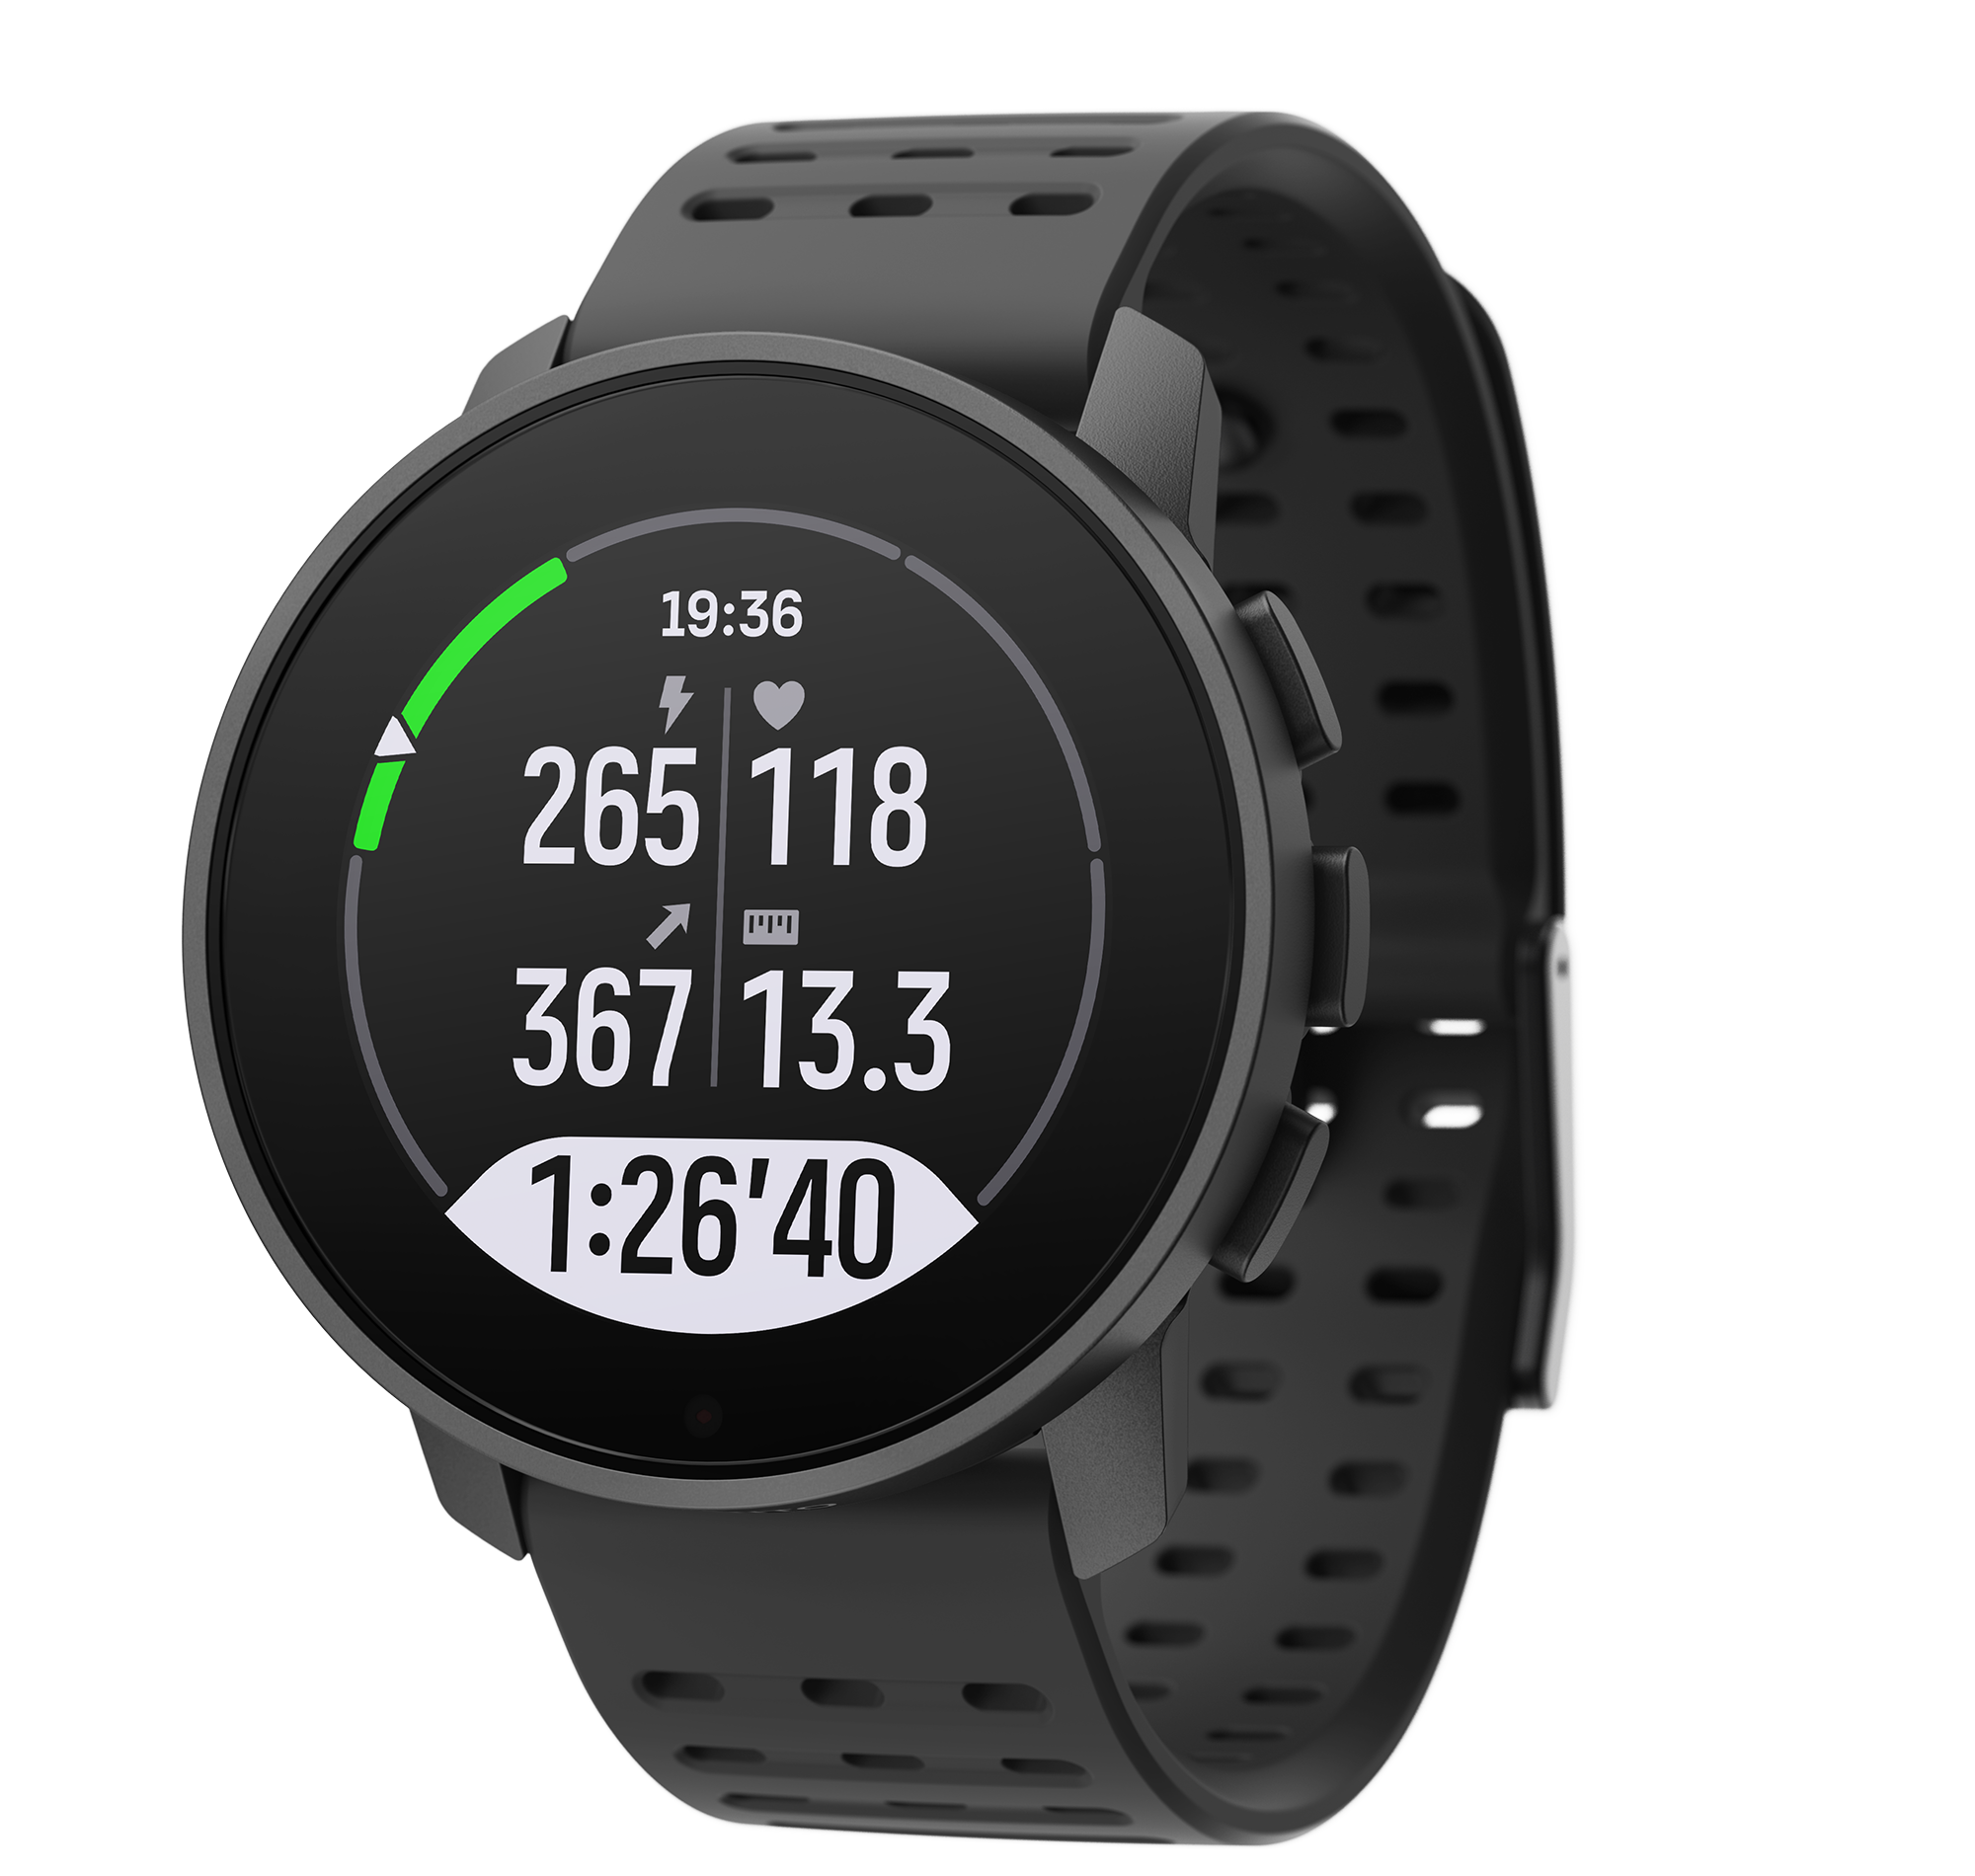 In addition to heart rate and running pace, running power is another metric that helps you manage your workload during exercise with Suunto 9 Peak Pro.